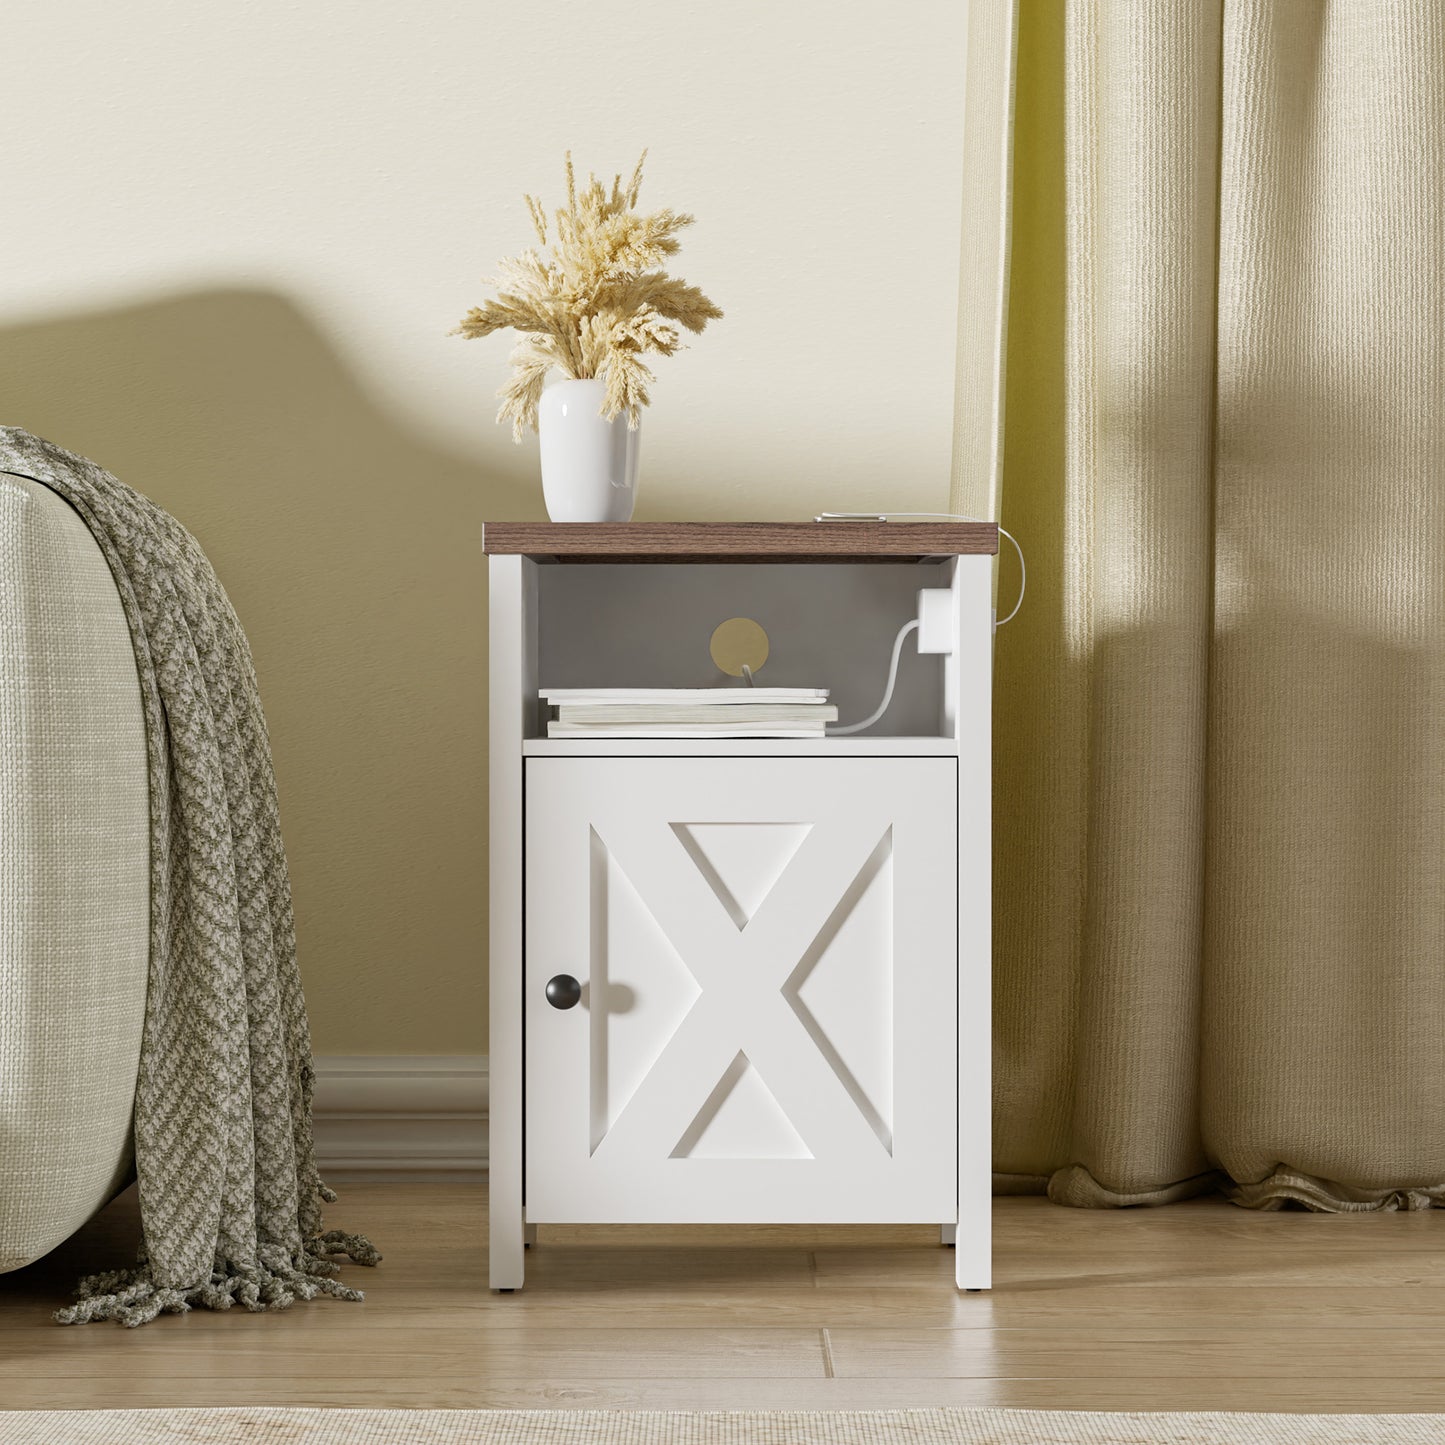 Cozy Castle Farmhouse Nightstands Set of 2 with Charging Station, White